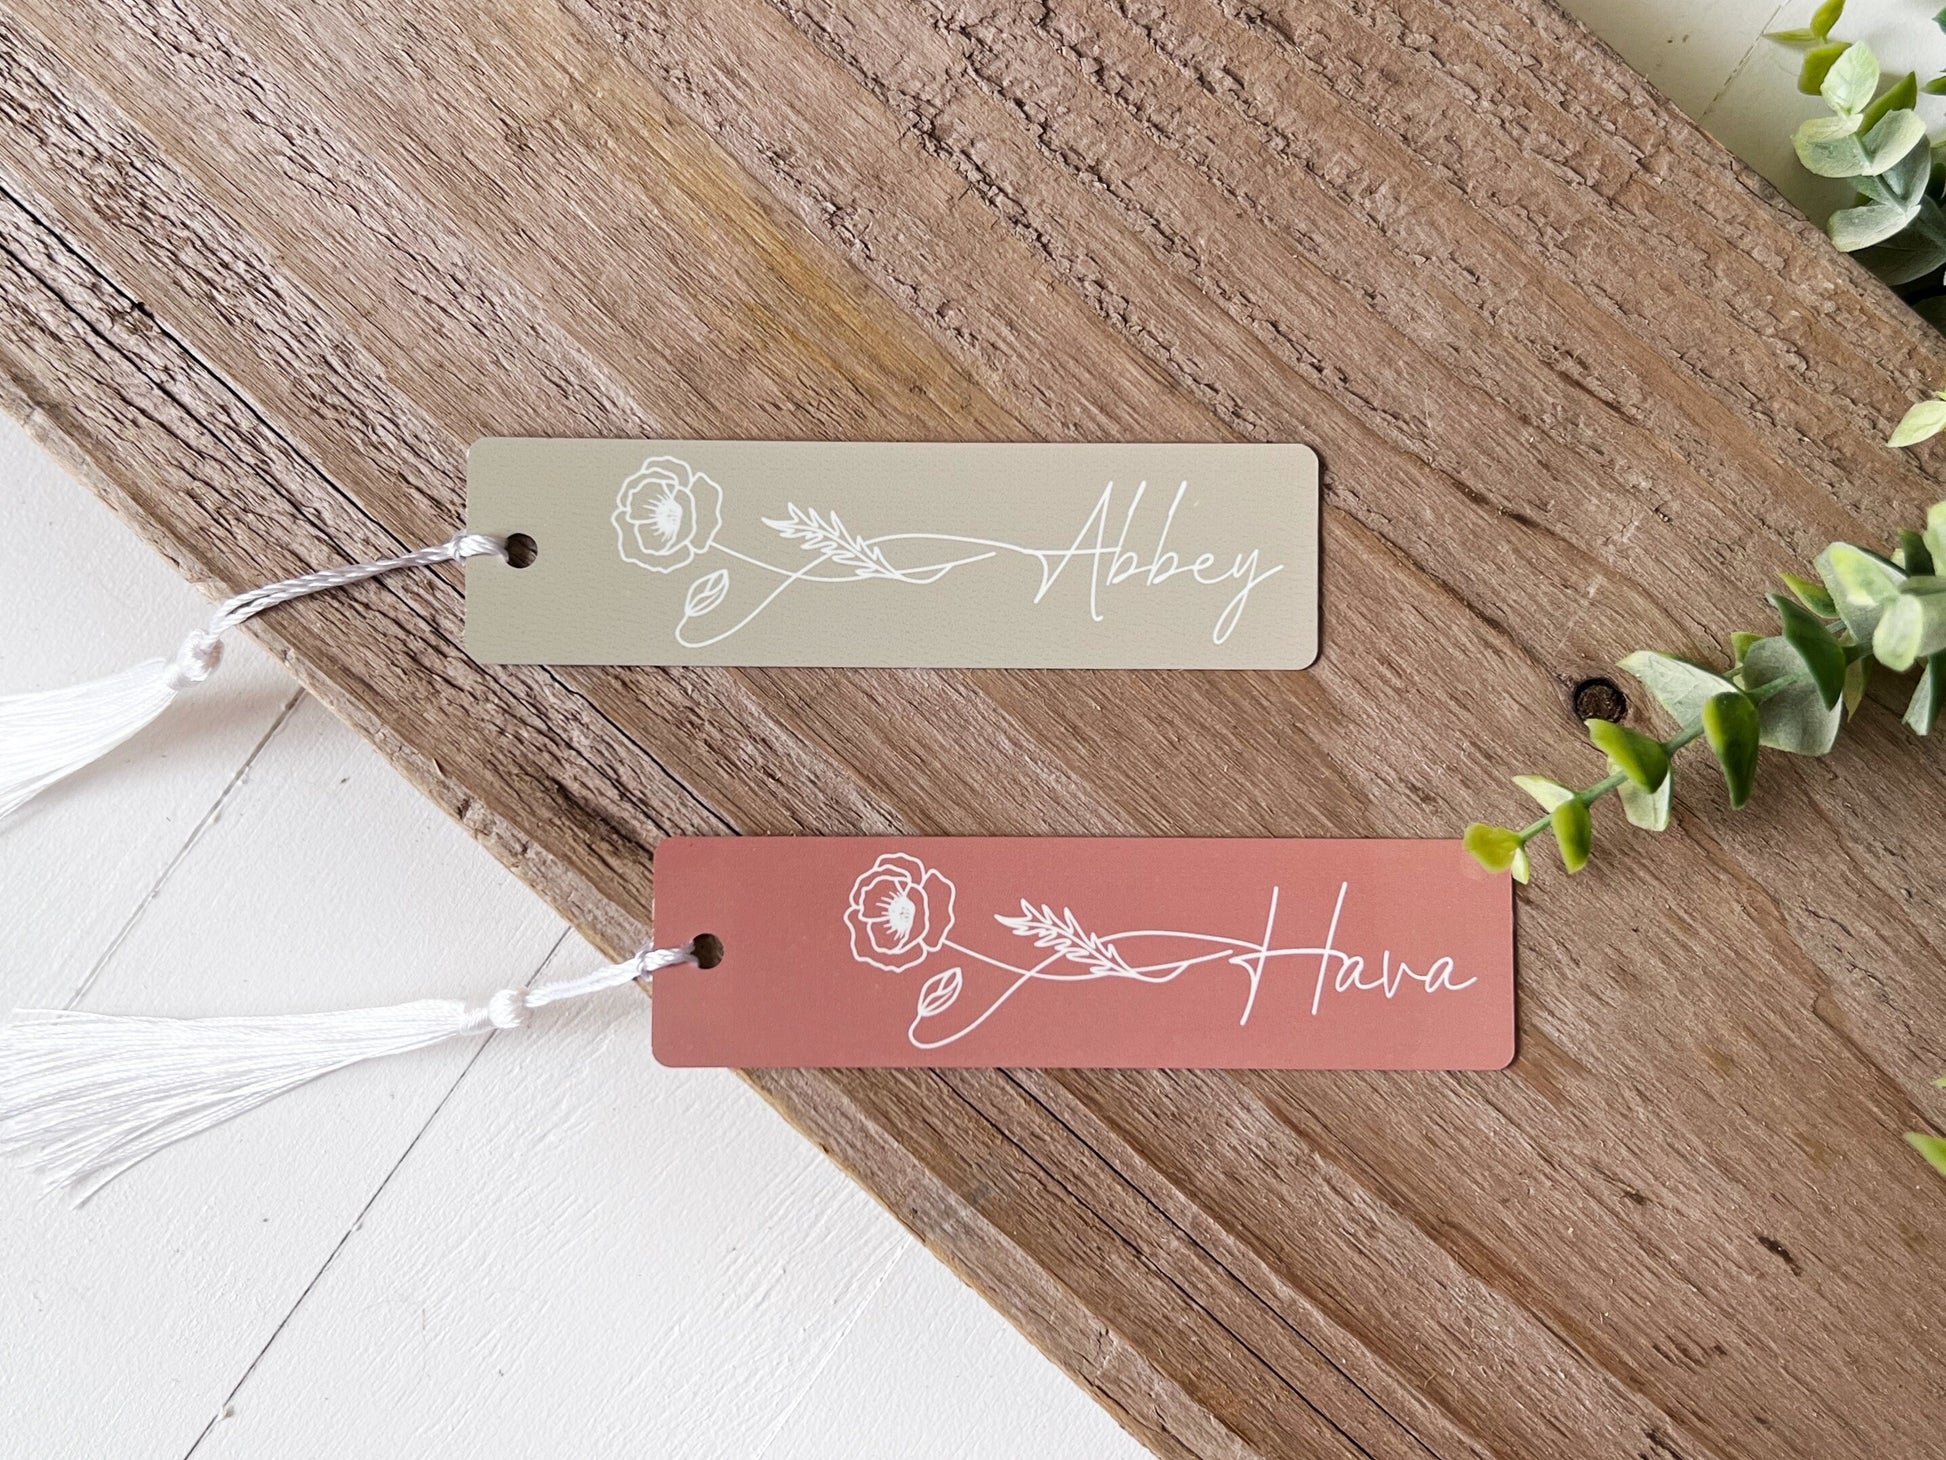 Personalized Bookmark, Customized Bookmark, Tassel Bookmark, Calligraphy  Bookmark, Bookmark Custom, Bookclub Bookmarks, Gift for Reader